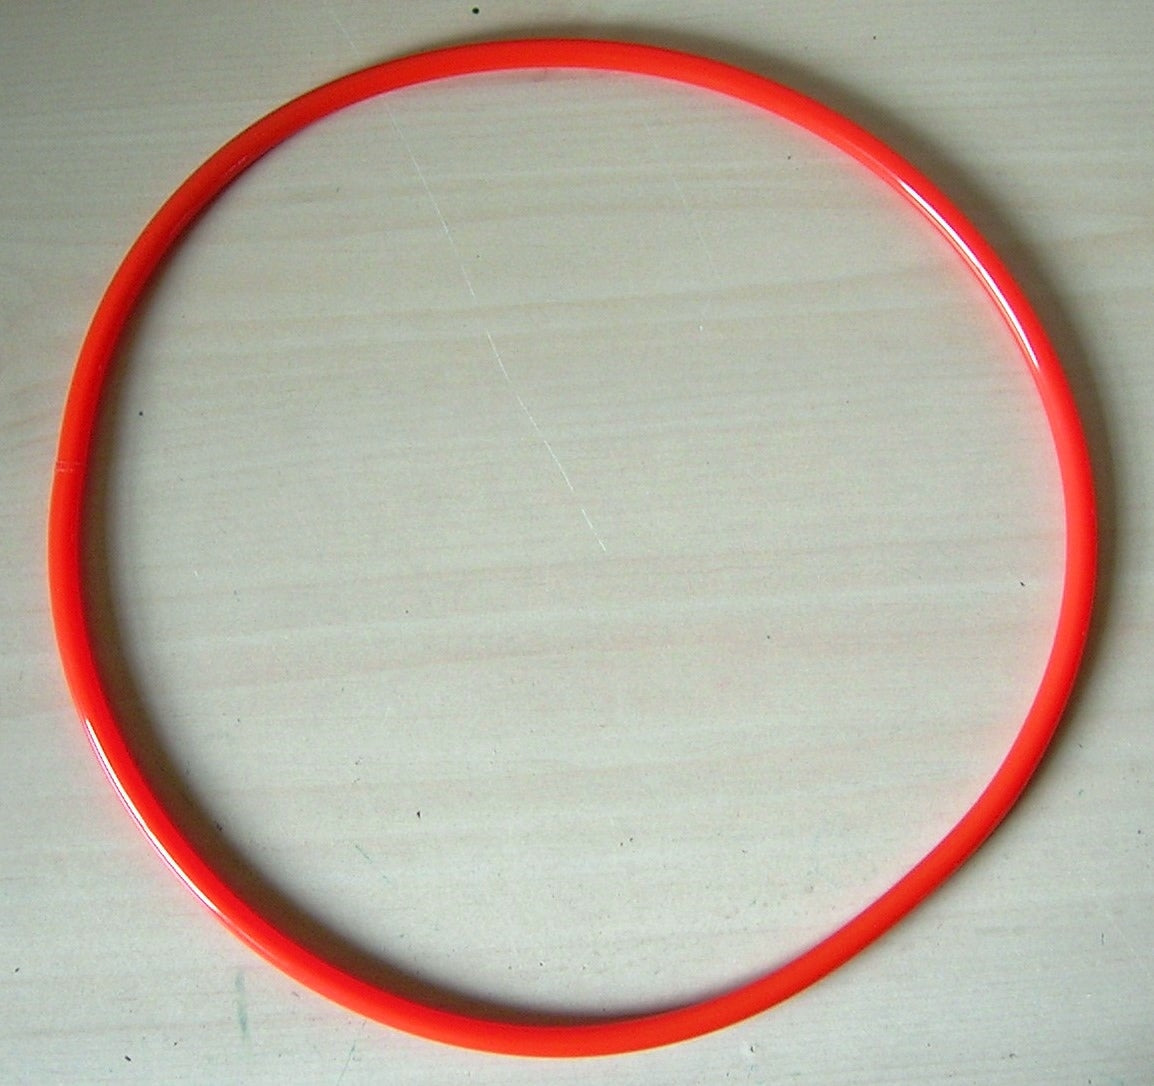 1/4" ROUND DRIVE BELT FOR NUTOOL 0134A BAND SAW